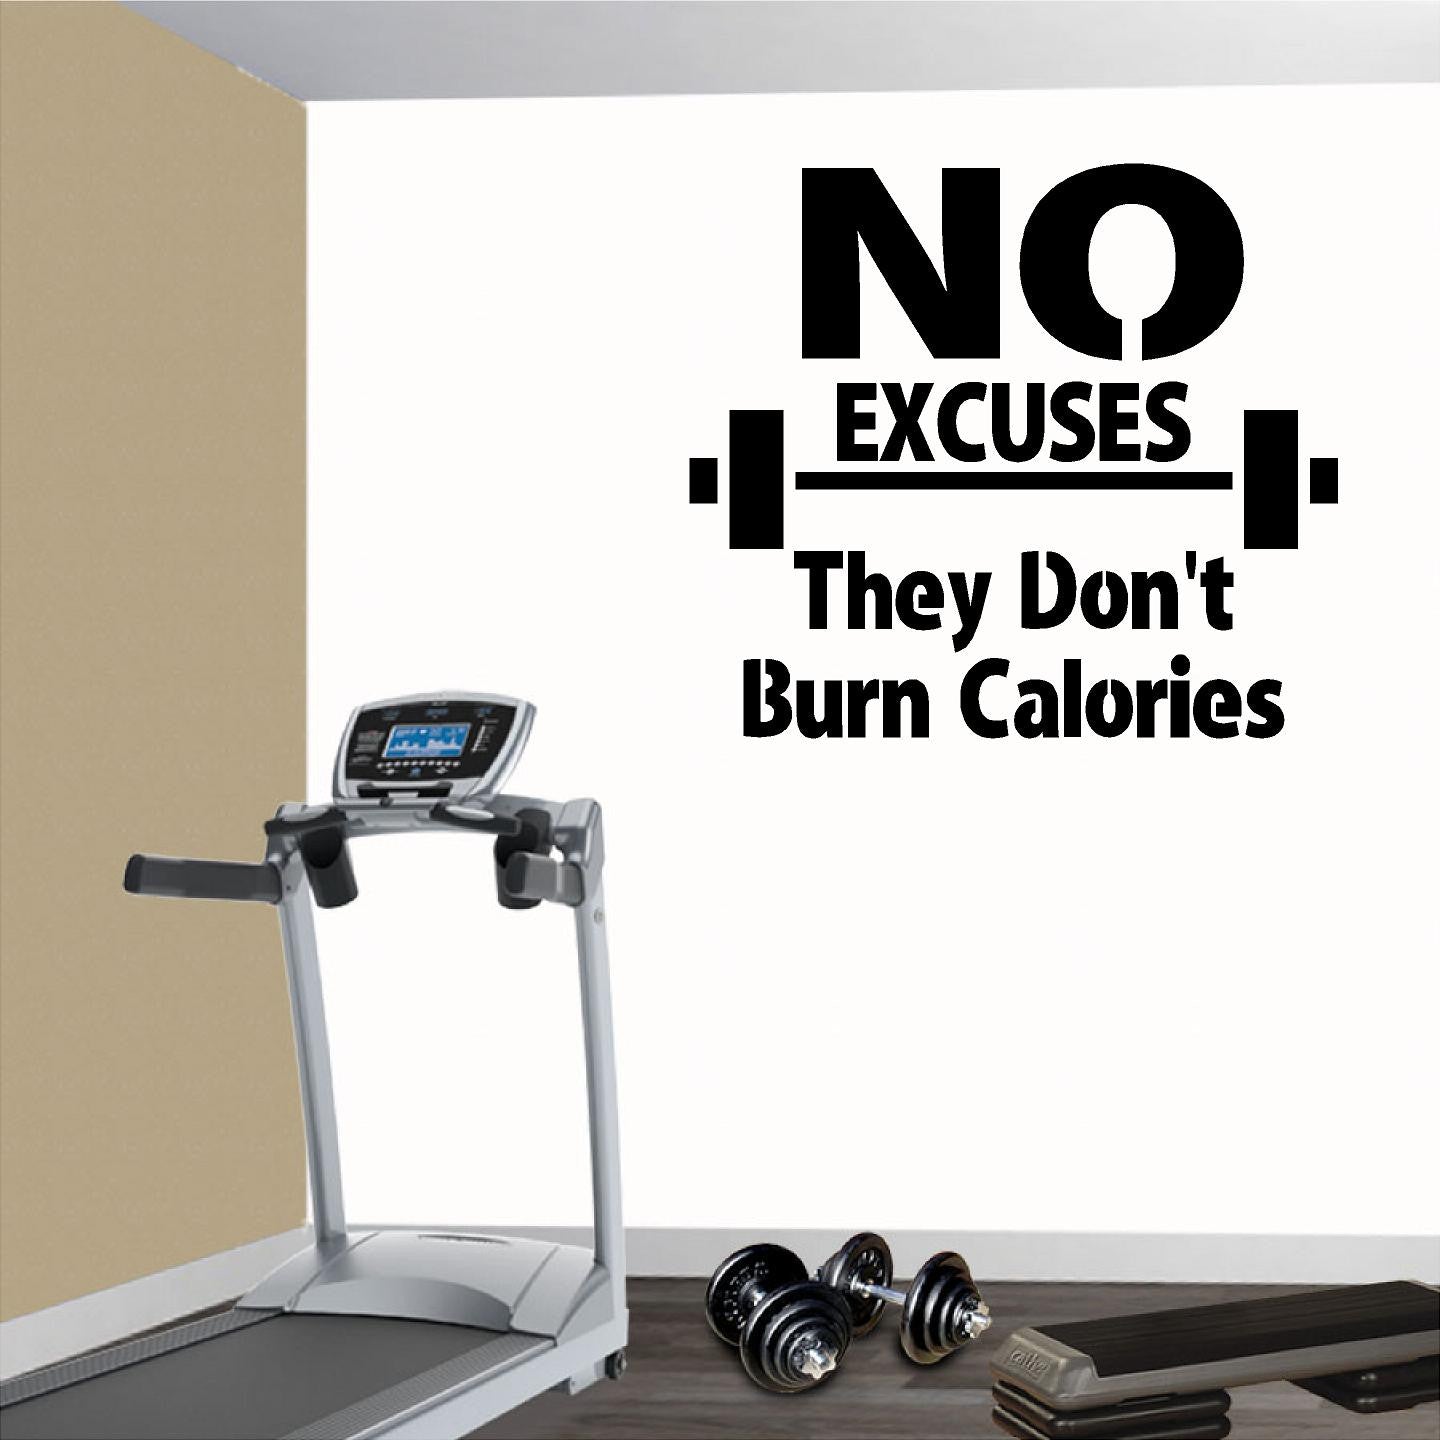 Stickers. Vinyl Wall Decal. Fitness. Gym. Exercise:  No Excuses They Don't Burn Calories.